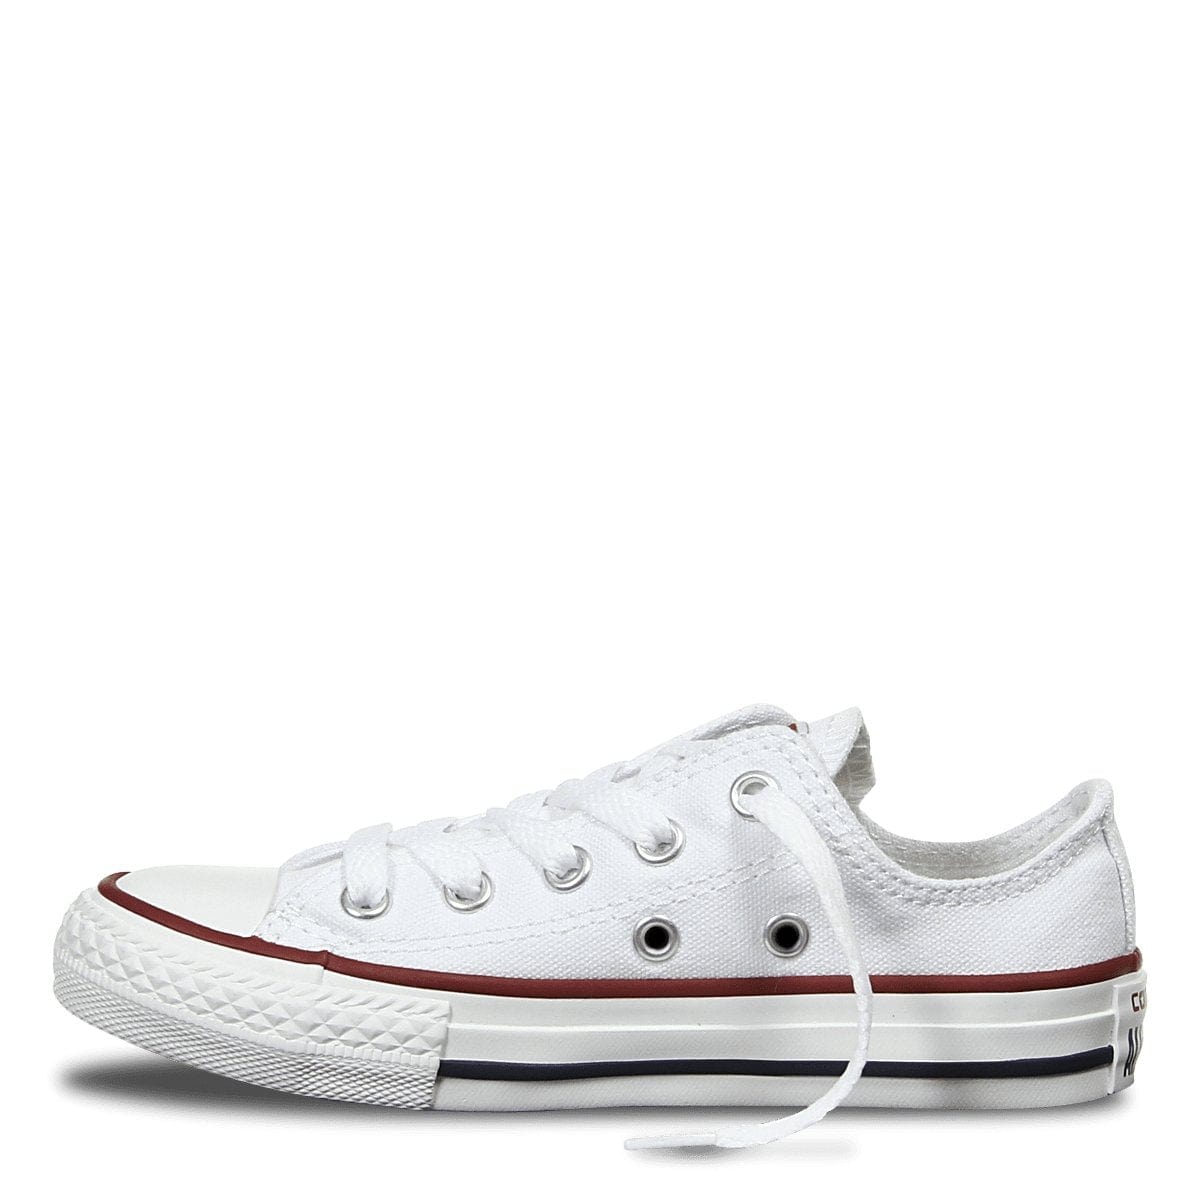 Converse CONVERSE TODDLER'S CHUCK TAYLOR ALL STAR LOW TOP WHITE SHOE - INSPORT